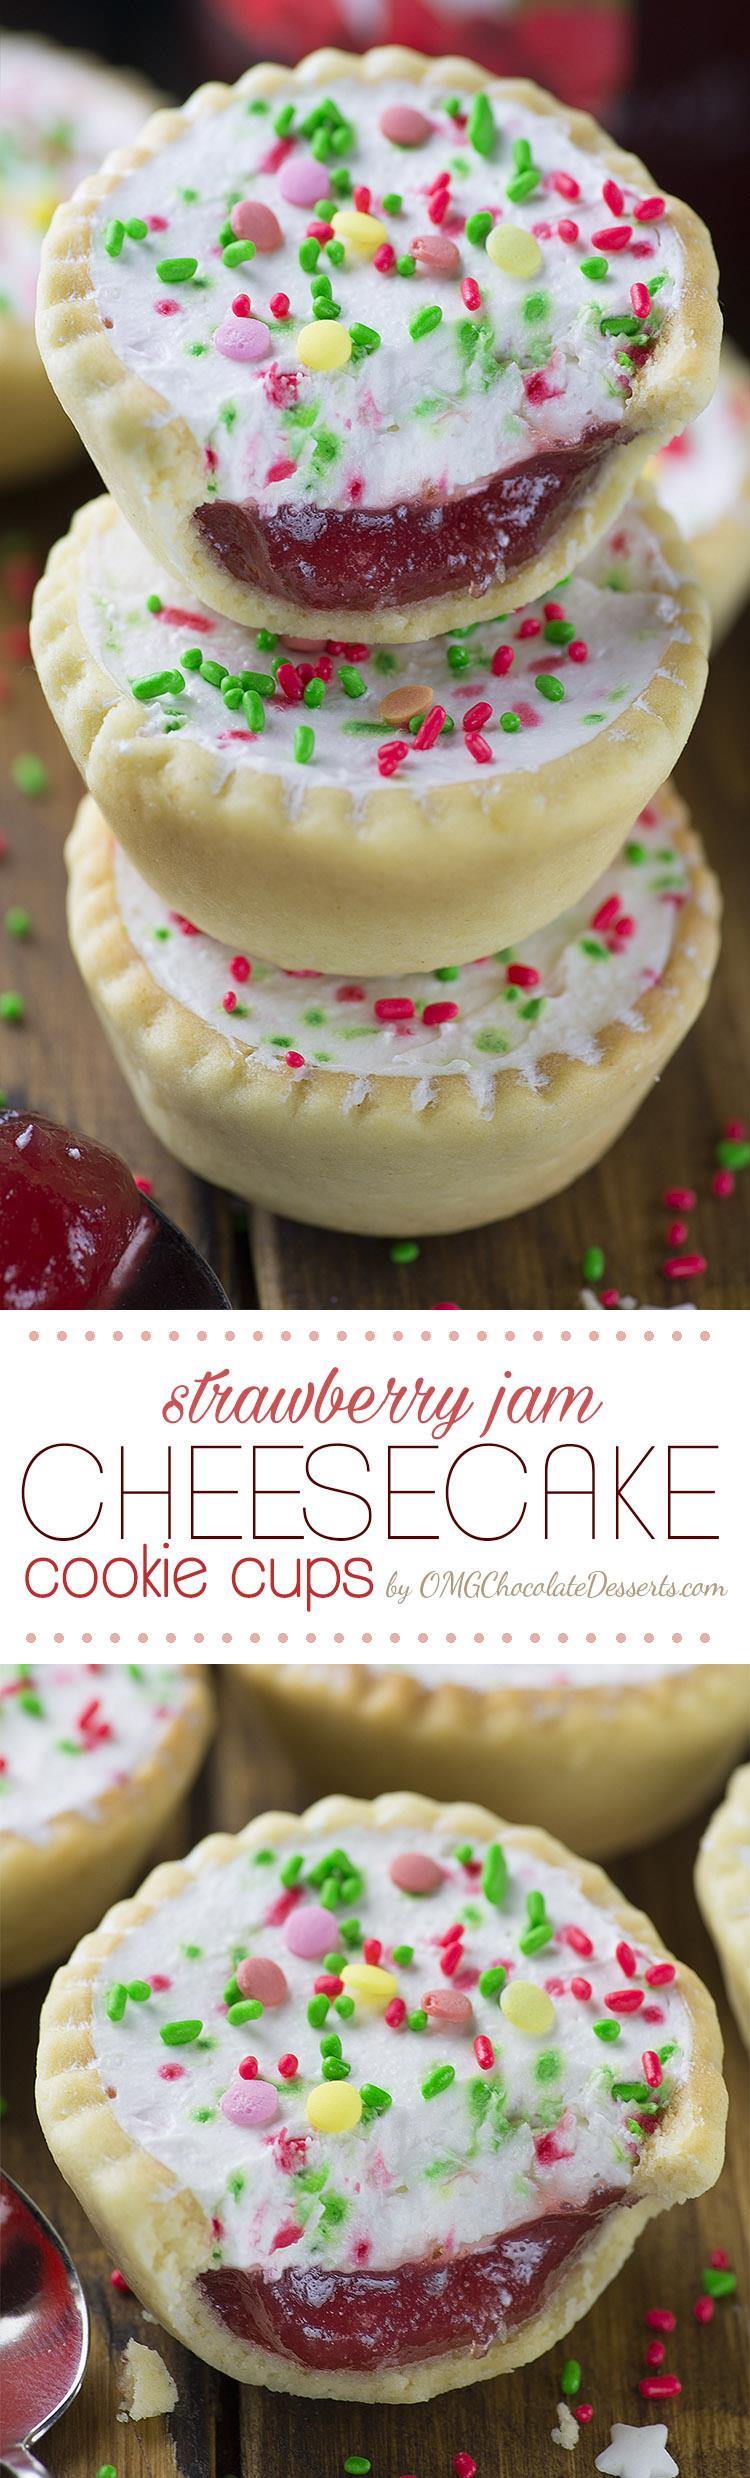 Sweet little cookie cups filled with strawberry jam and no bake cheesecake will be your original and perfect Christmas cookies decision! Don’t miss the beautiful Strawberry Jam Cheesecake Cookies